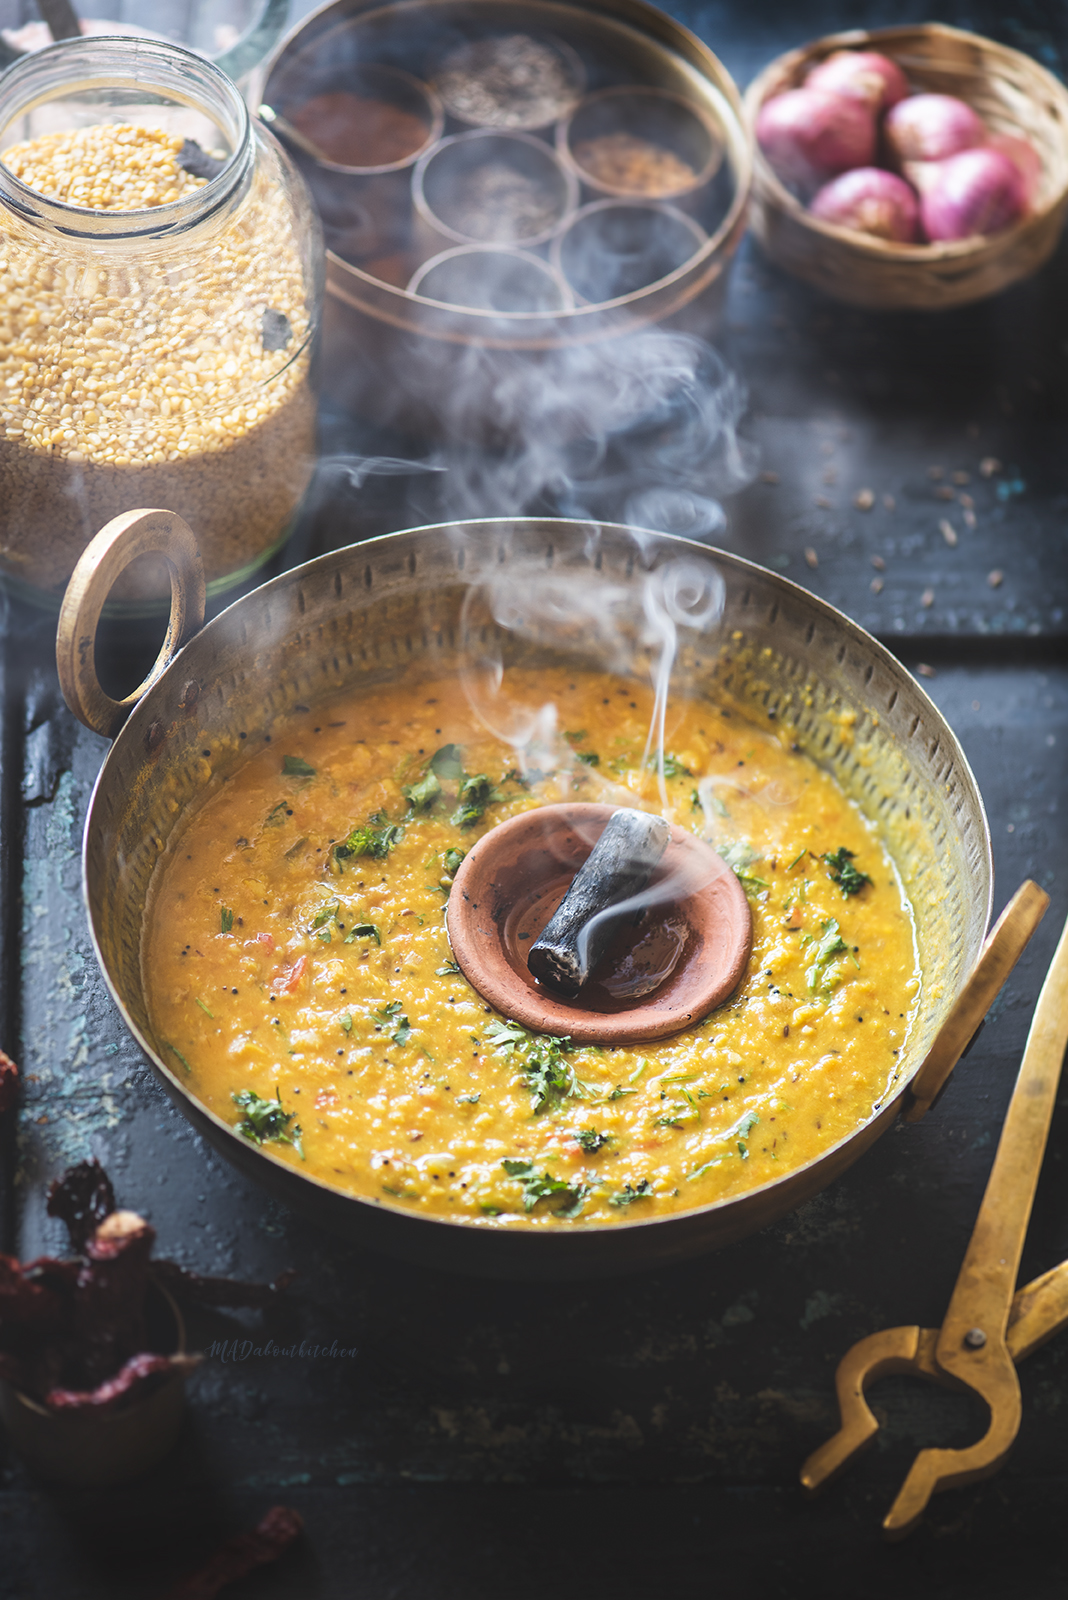 Dhaba Style Peeli Dal or the Yellow Dal is one of the Indian dal preparations, made using split yellow moong beans & is super simple, tasty and a healthy.